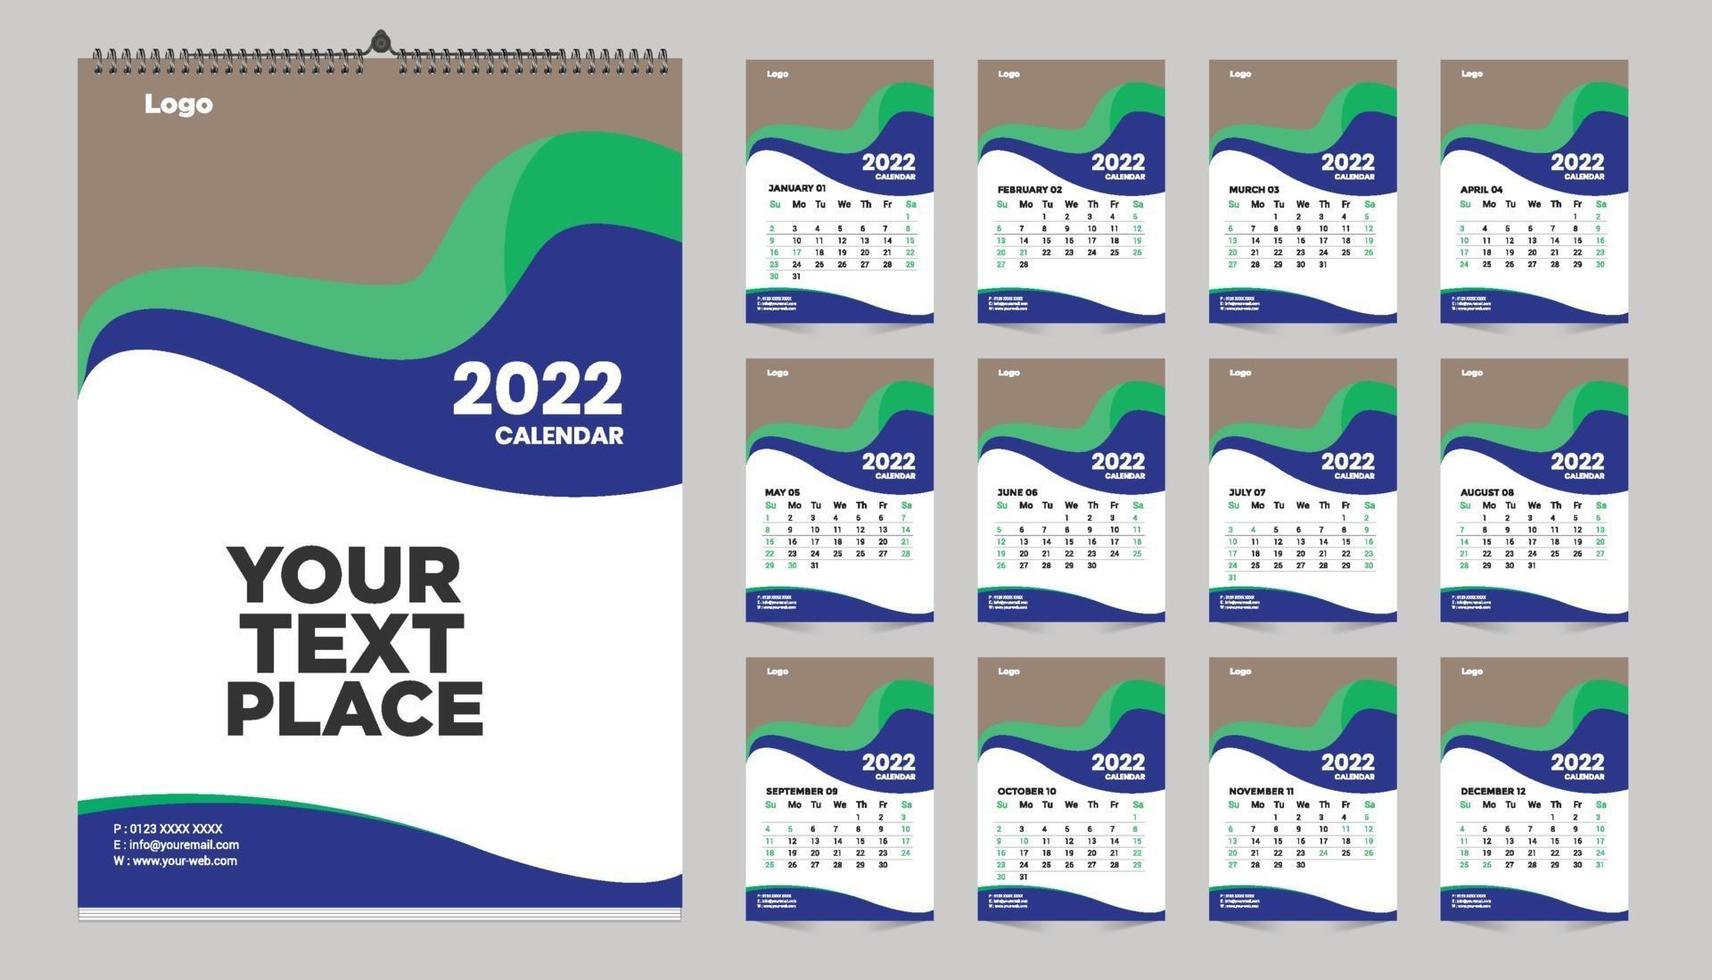 free-monthly-wall-calendar-template-design-for-2022-2023-2024-2025-2026-2026-year-week